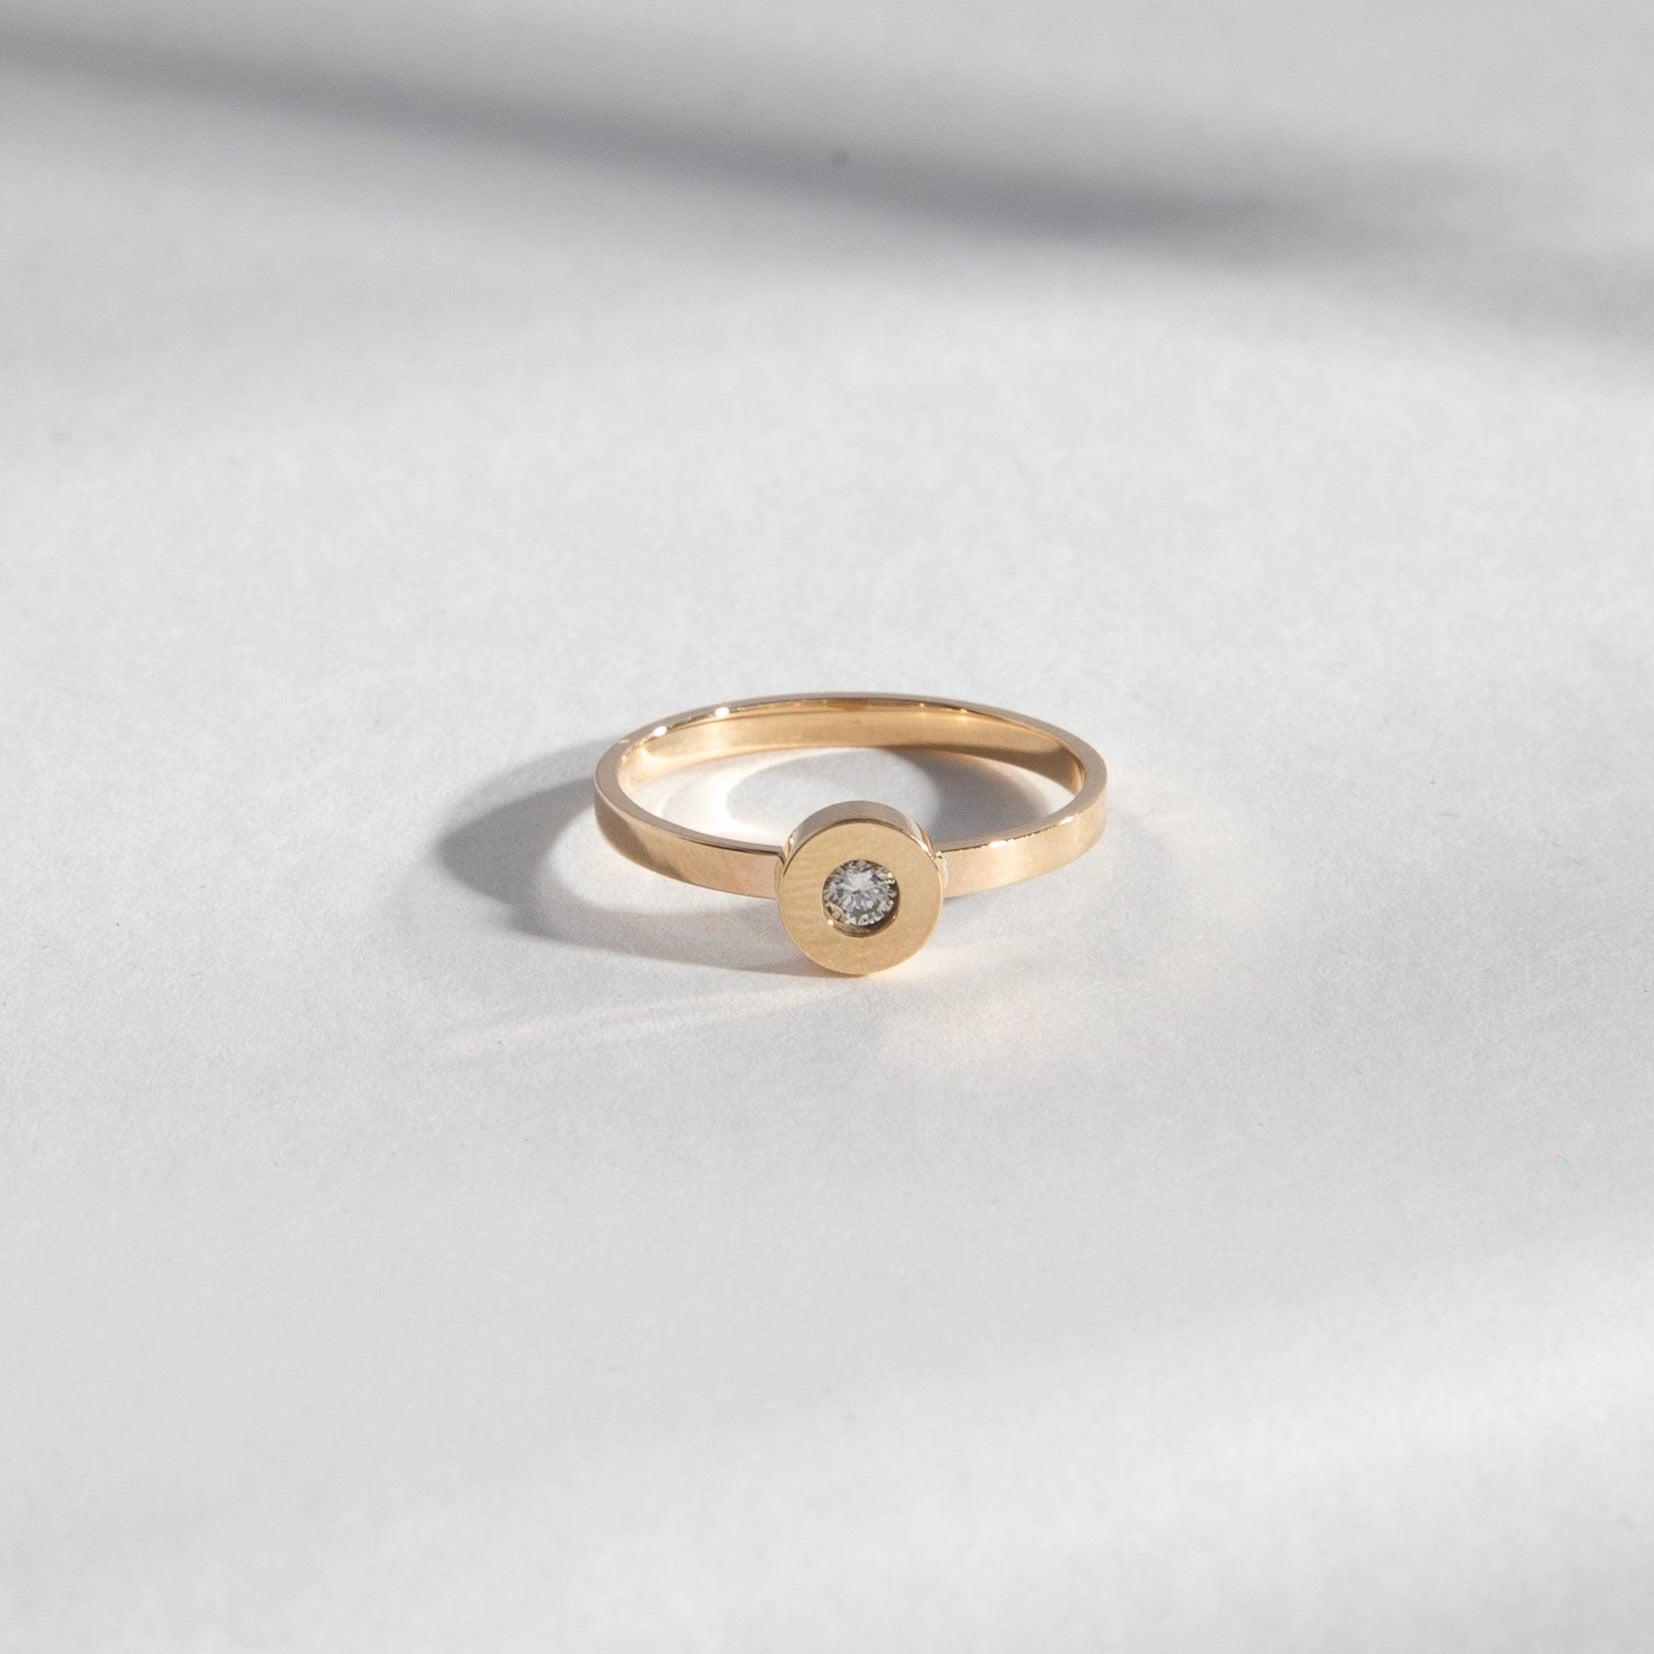 Shara Minimalist Ring in 14k Gold set with lab-grown diamond By SHW Fine Jewelry NYC